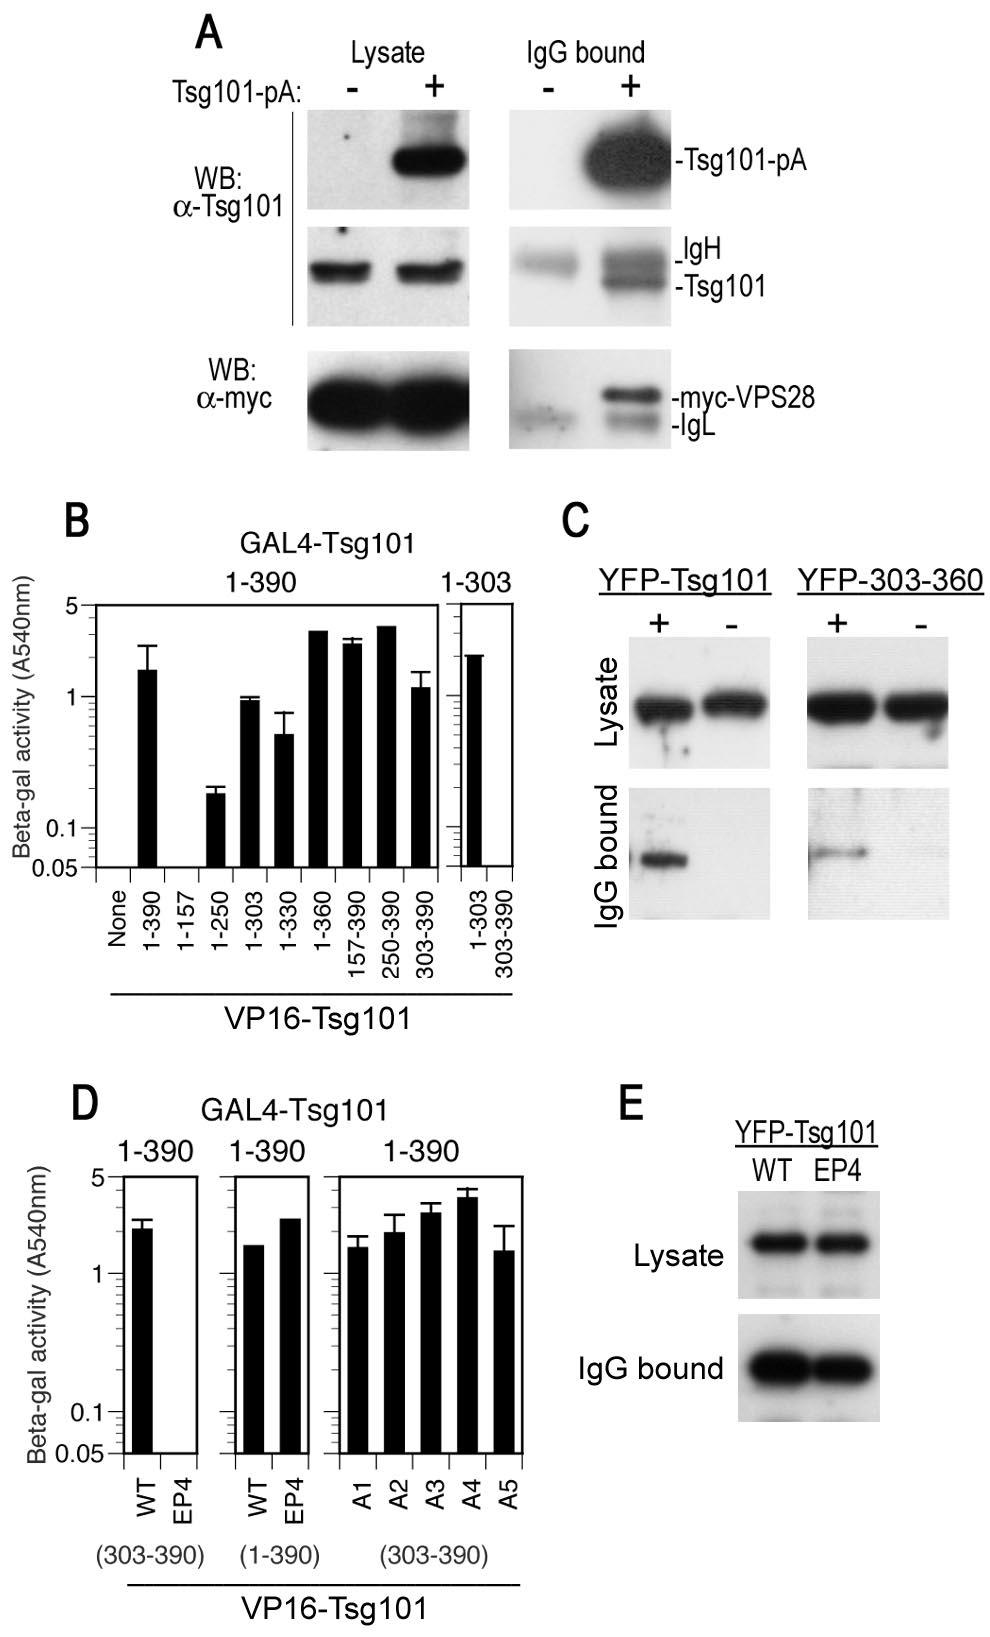 VOL. 77, 2003 ESCRT-I AND RETROVIRAL BUDDING 4799 FIG. 4. Tsg101 multimerization mediated by sequences in the leucine zipper and C-terminal domains.